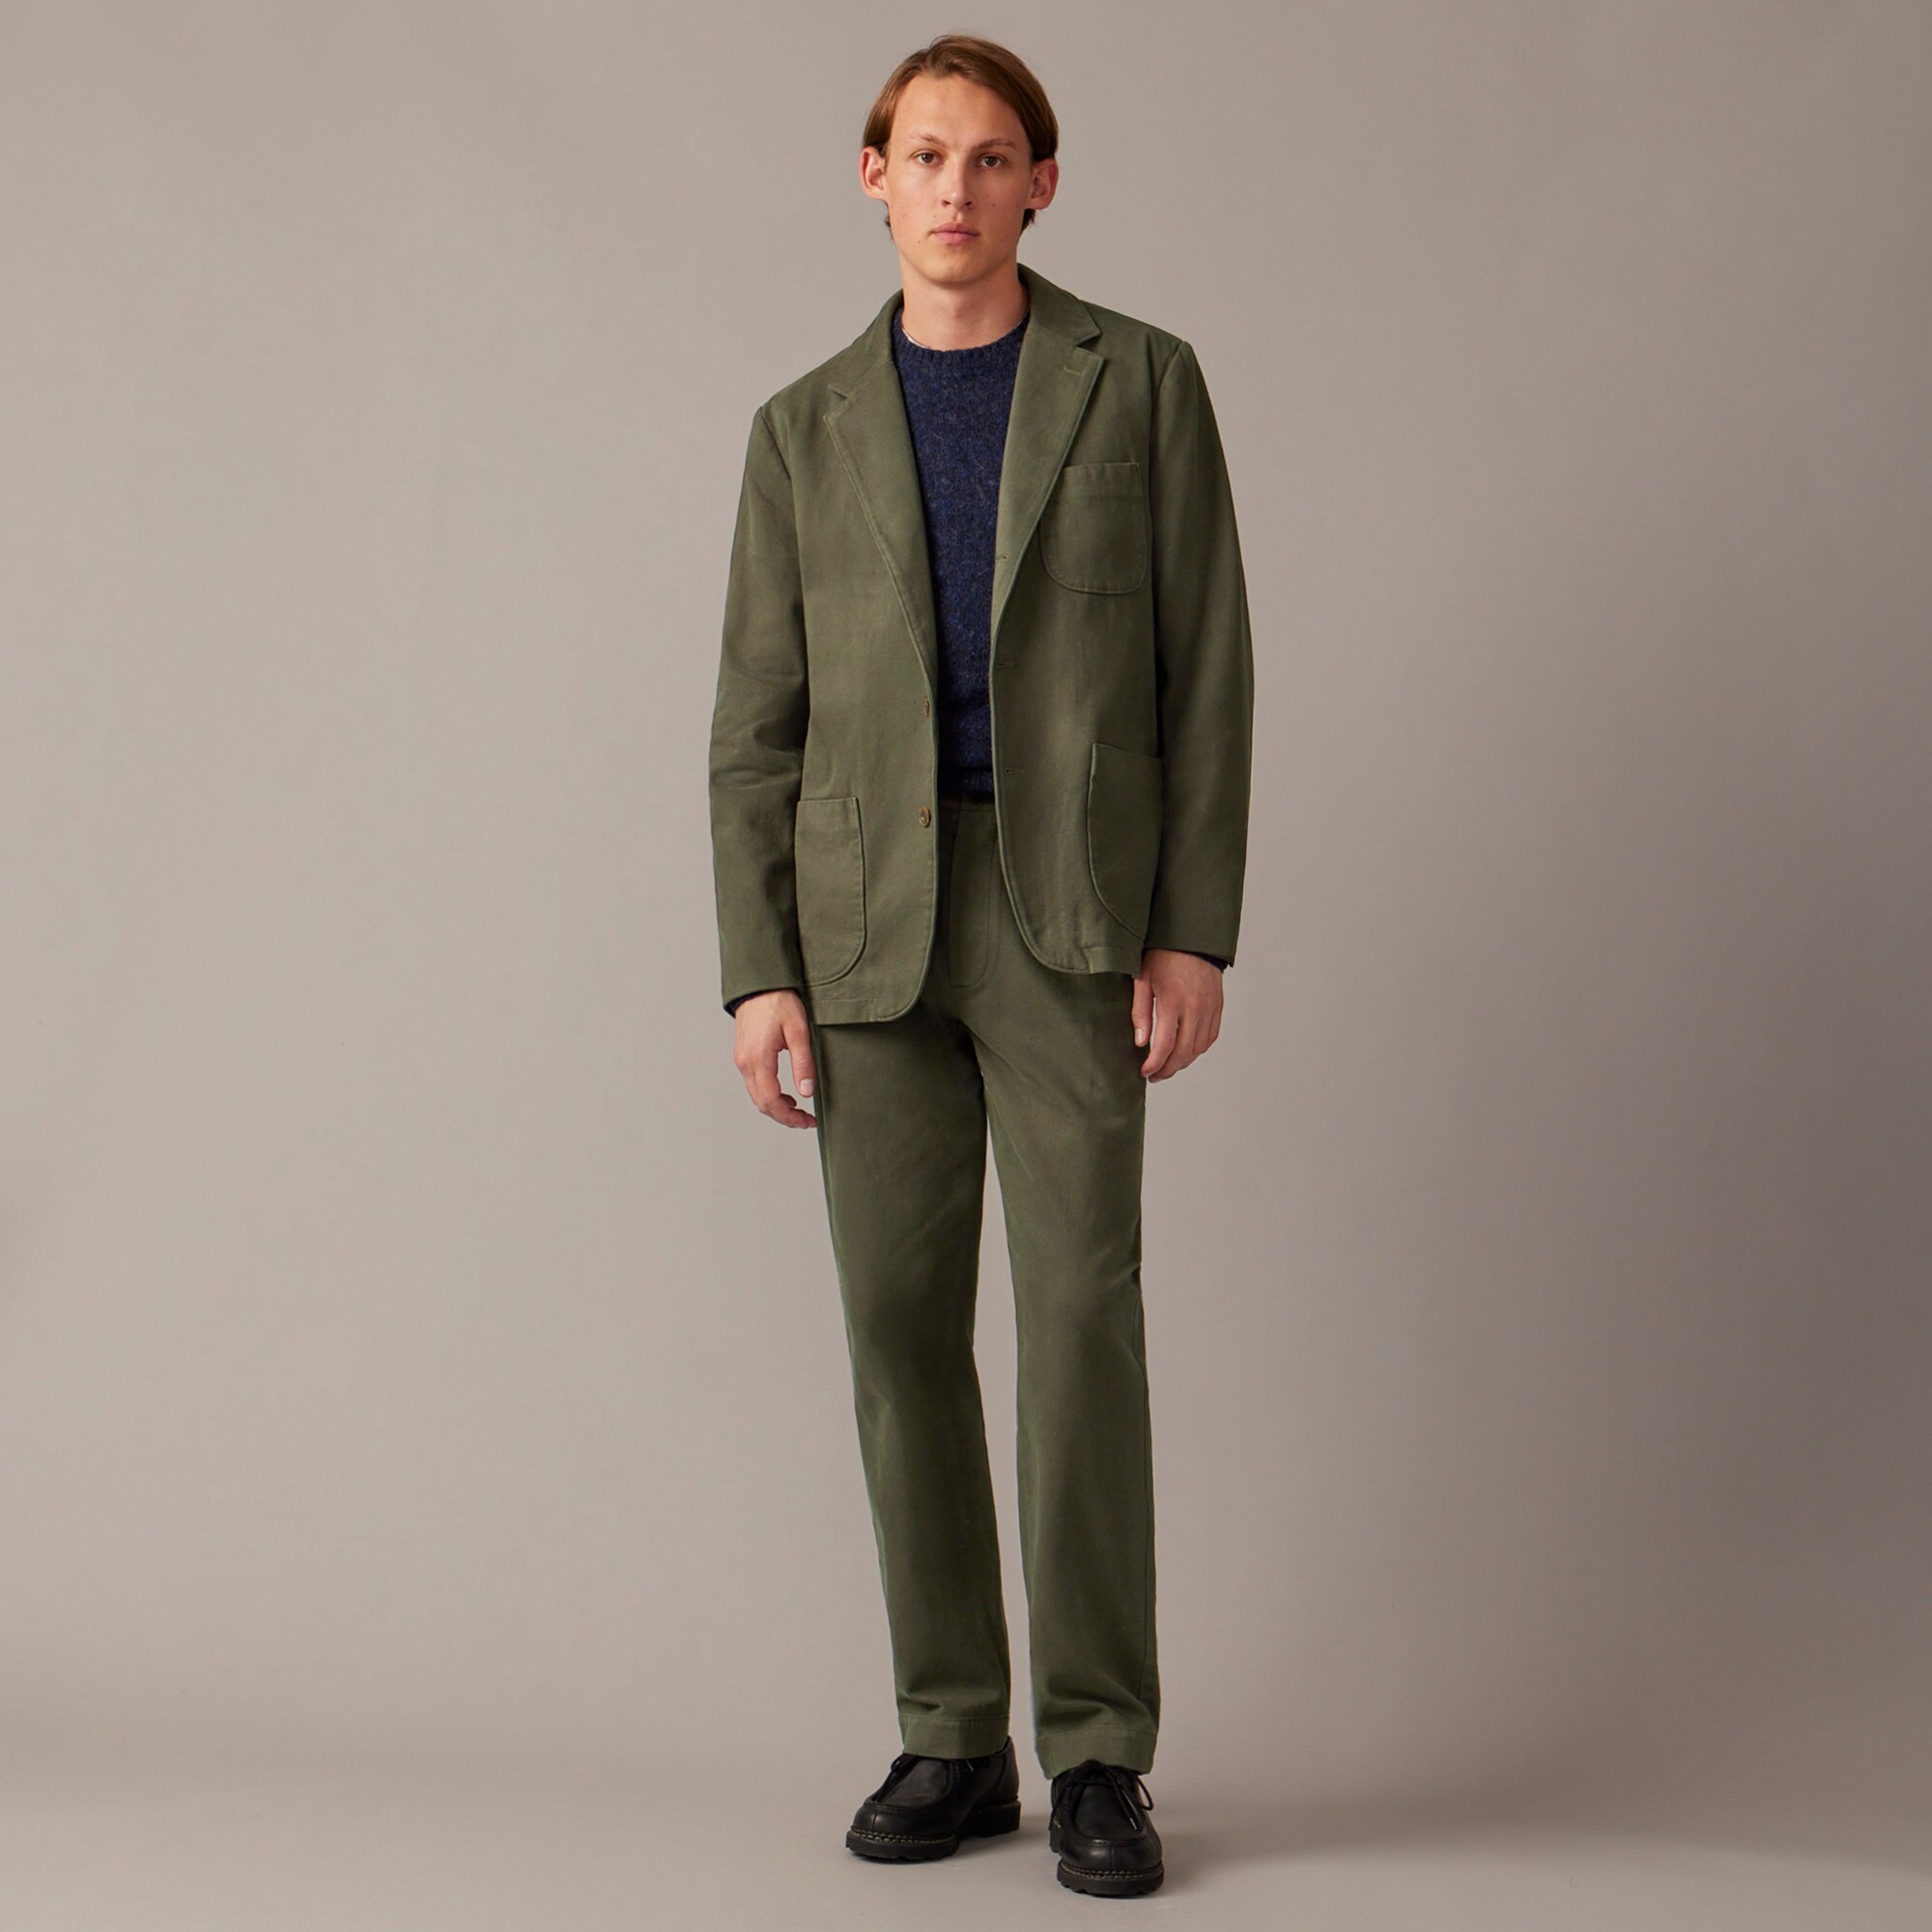 mens Garment-dyed suit jacket in Italian cotton drill